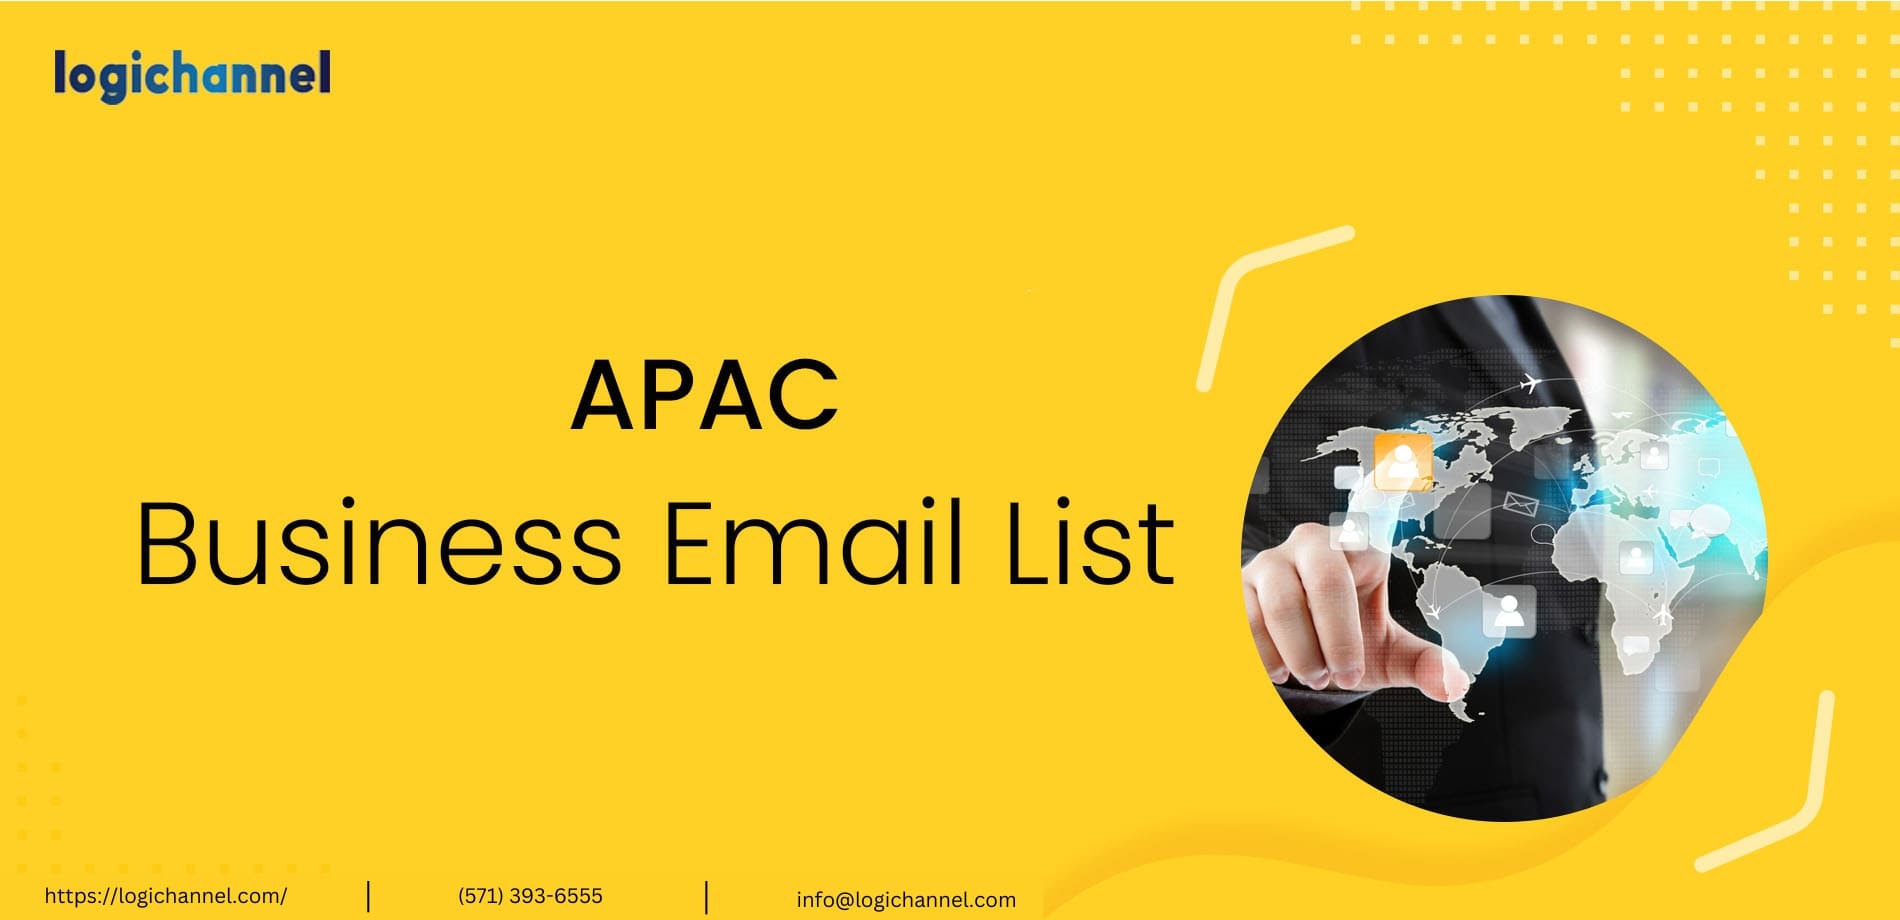 APAC Business Mailing List | APAC Business Email List | LogiChannel